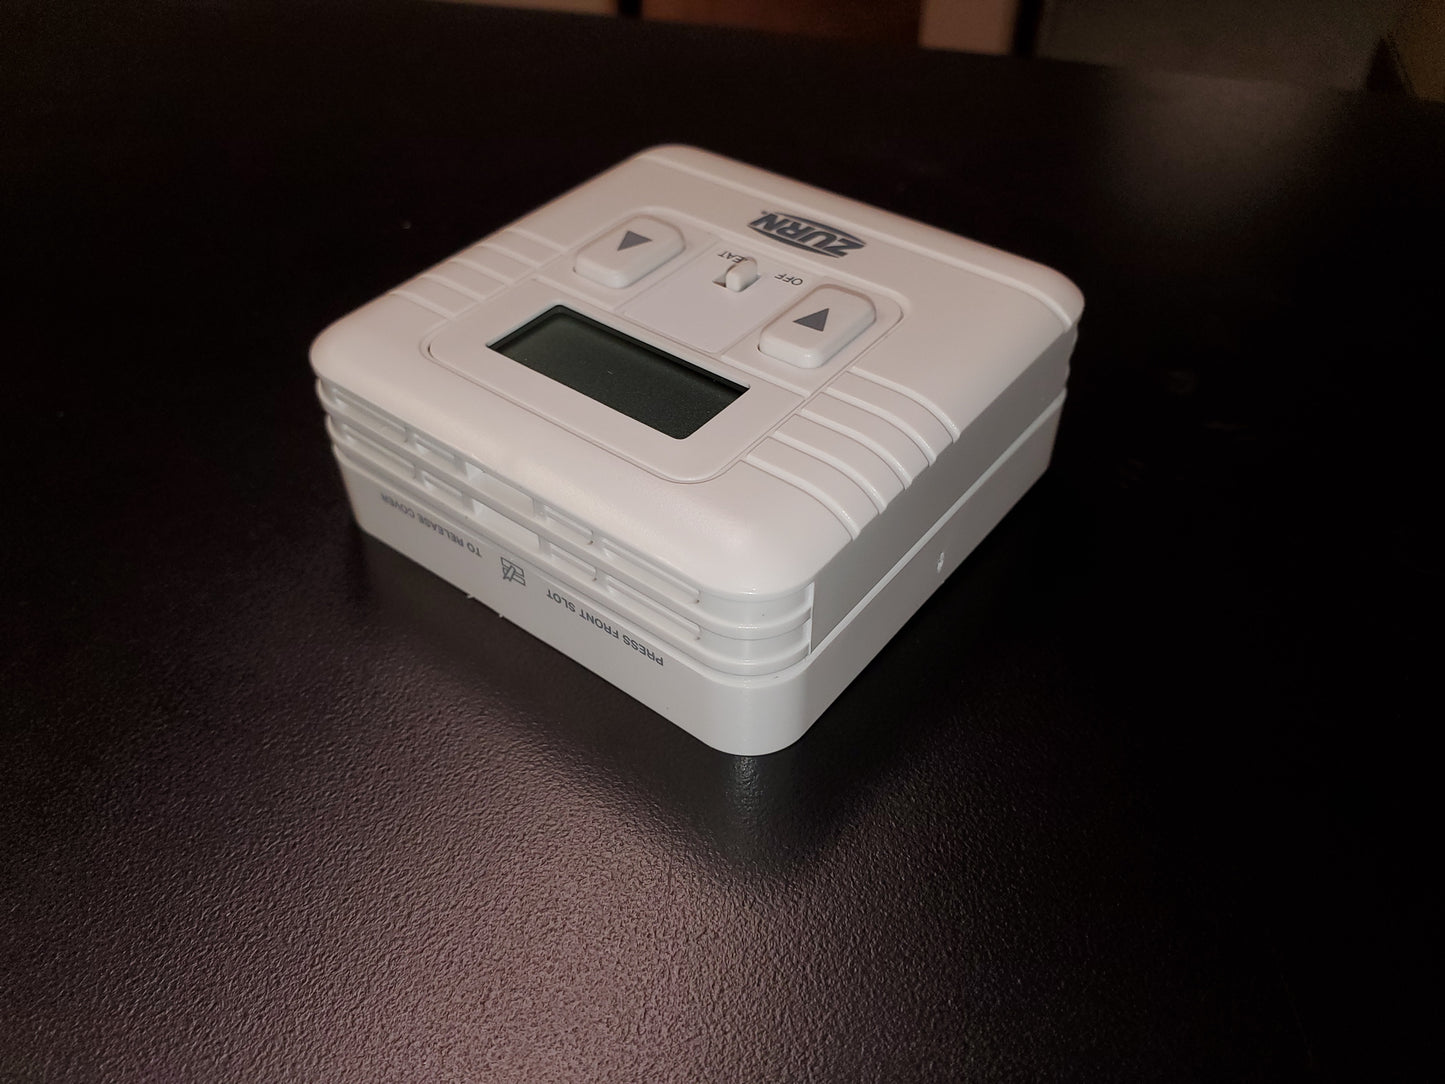 24 VOLT HARD-WIRED DIGITAL NON-PROGRAMMABLE THERMOSTAT